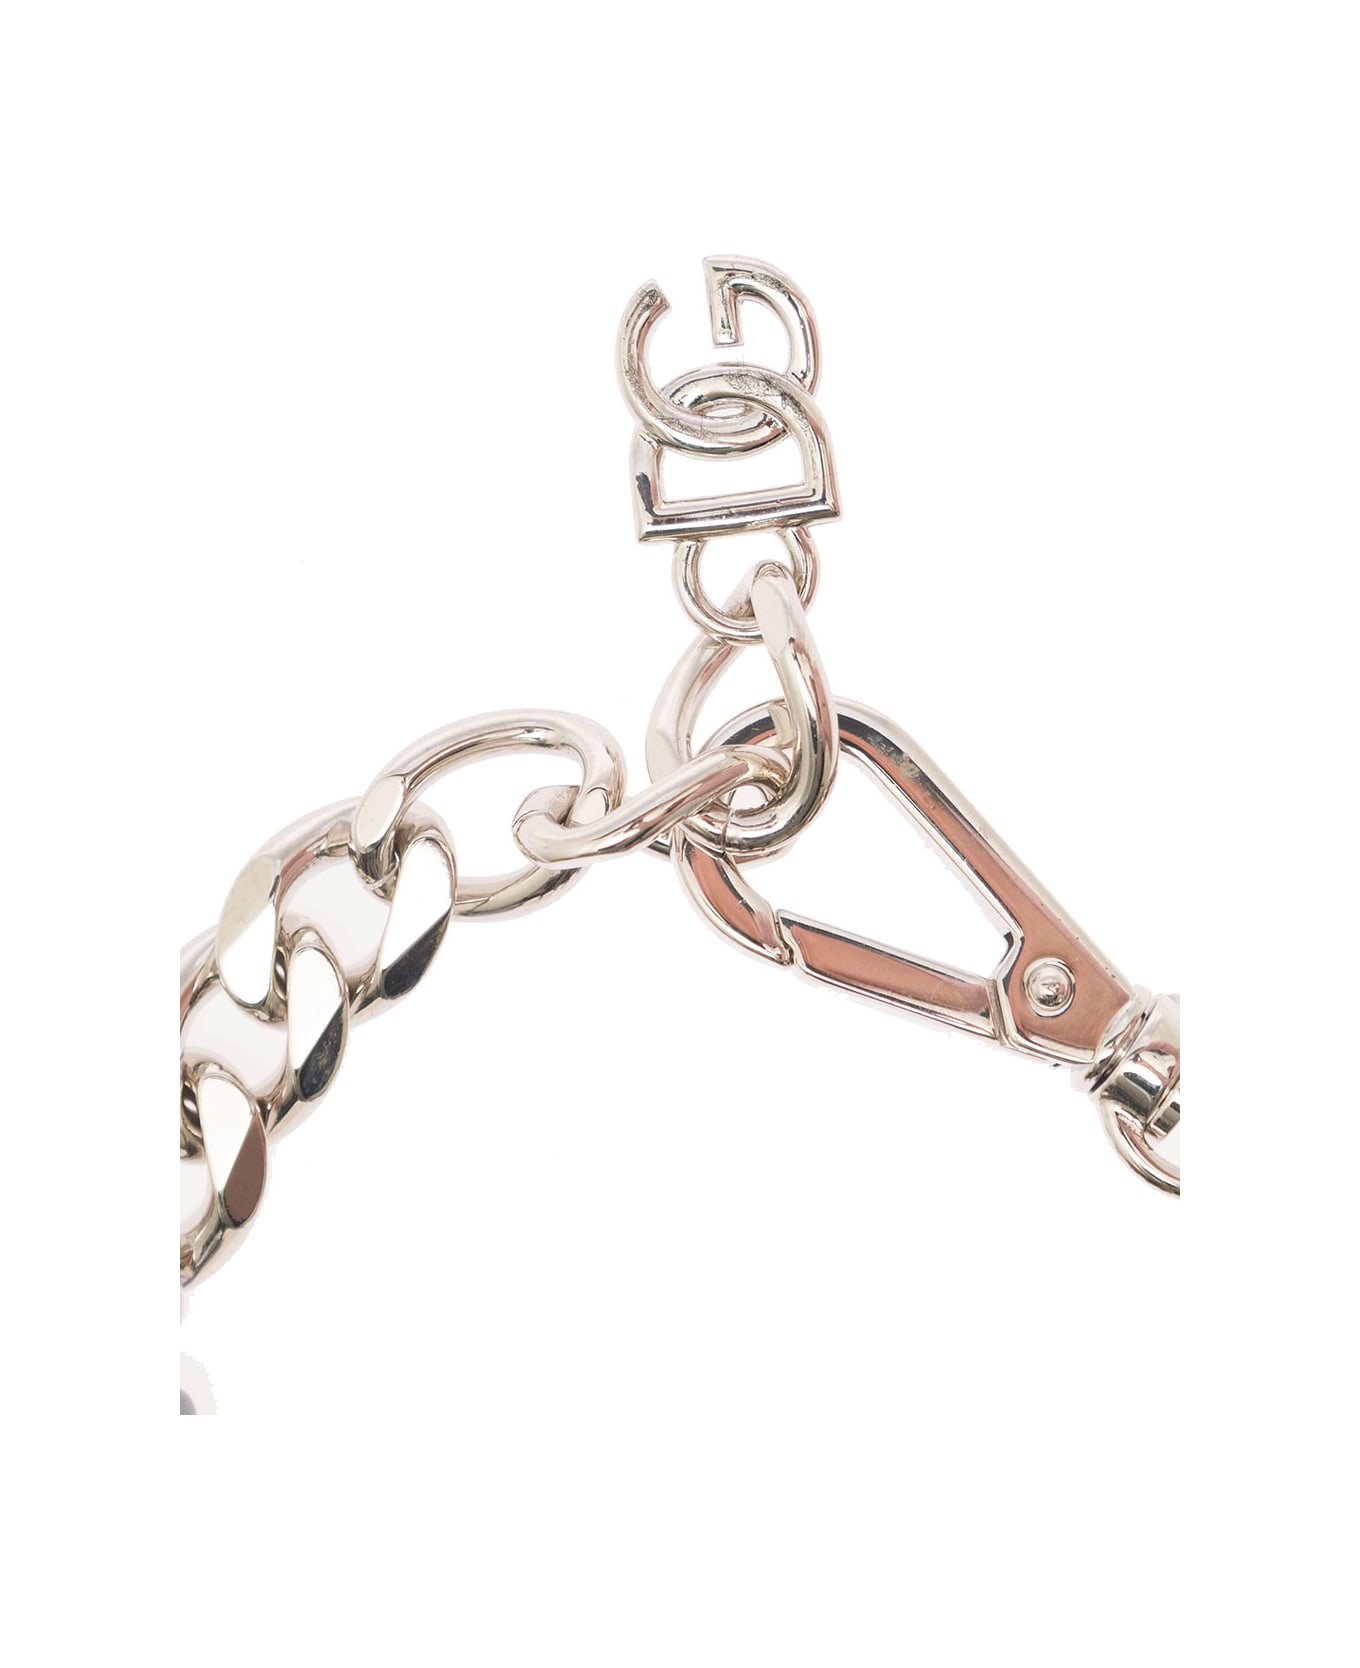 Dolce & Gabbana Silver-colored Bracelet With Shell And Logo Charm In Brass Woman - Metallic ブレスレット